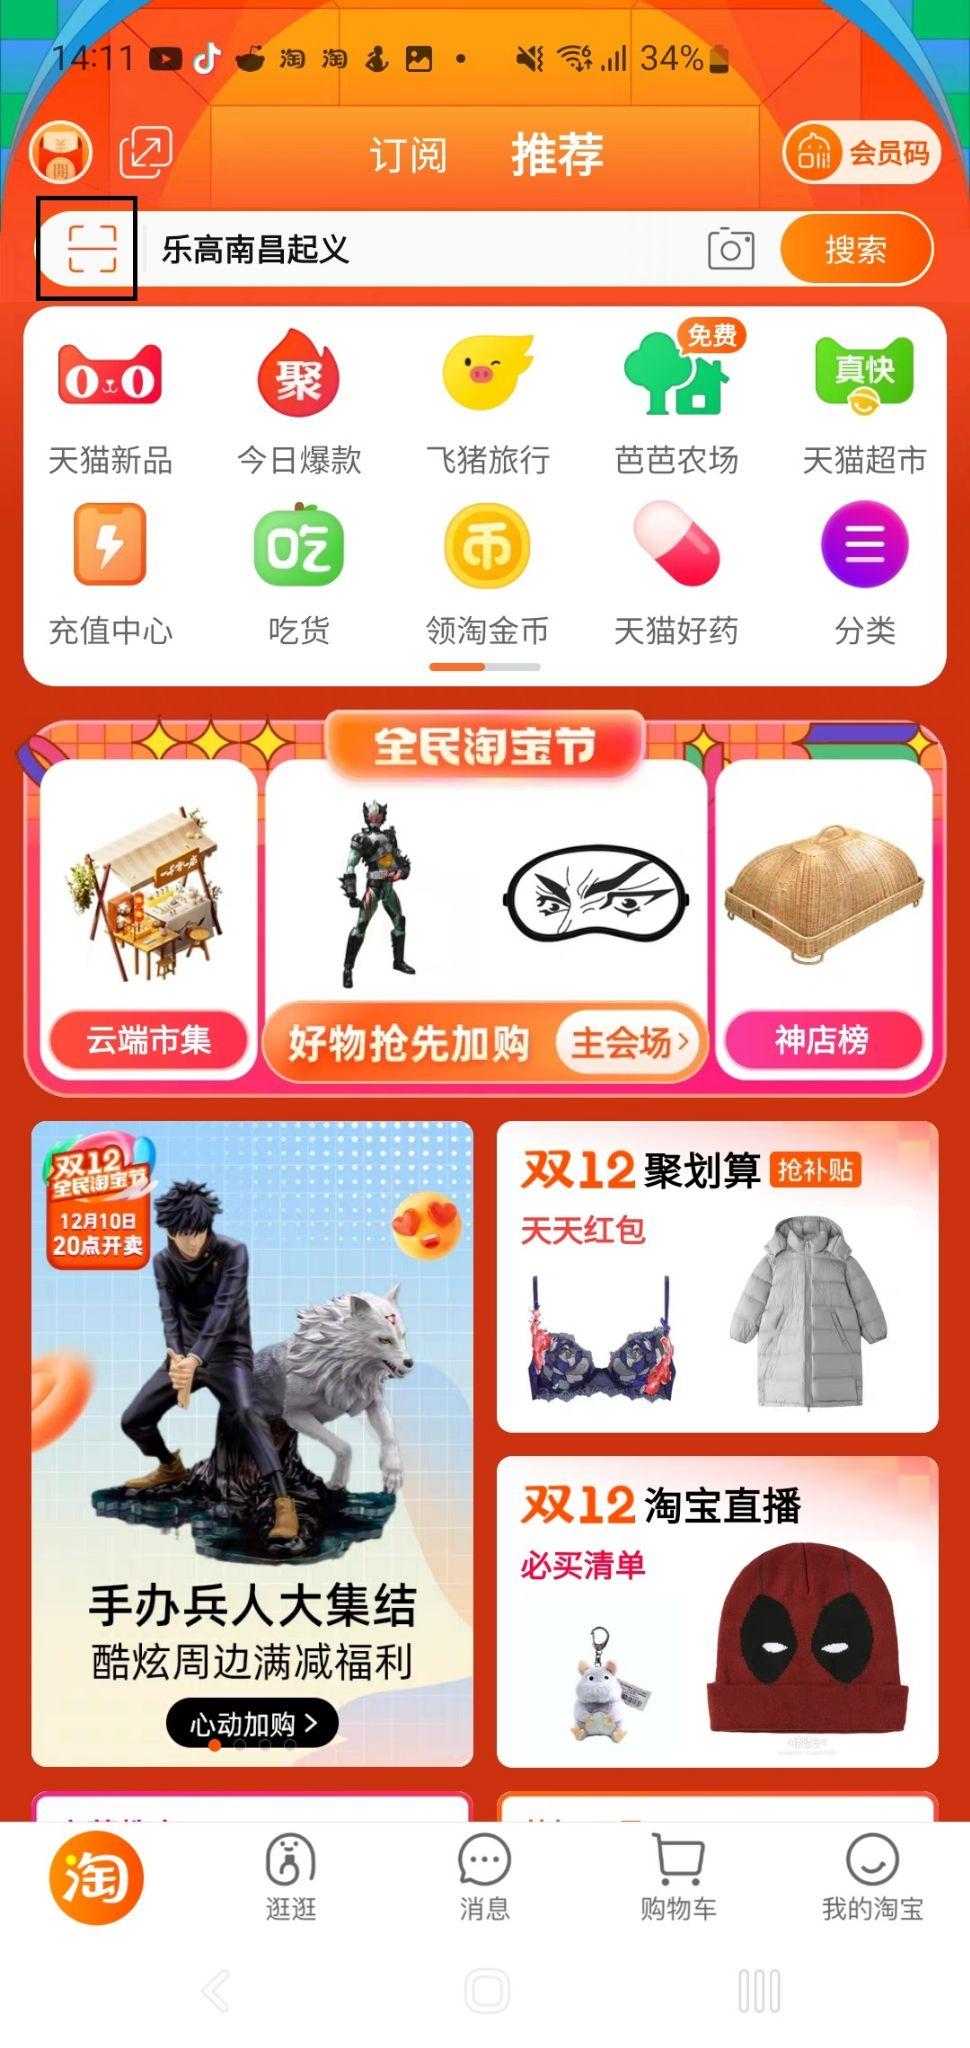 Visit recommended stores to collect Taobao coins